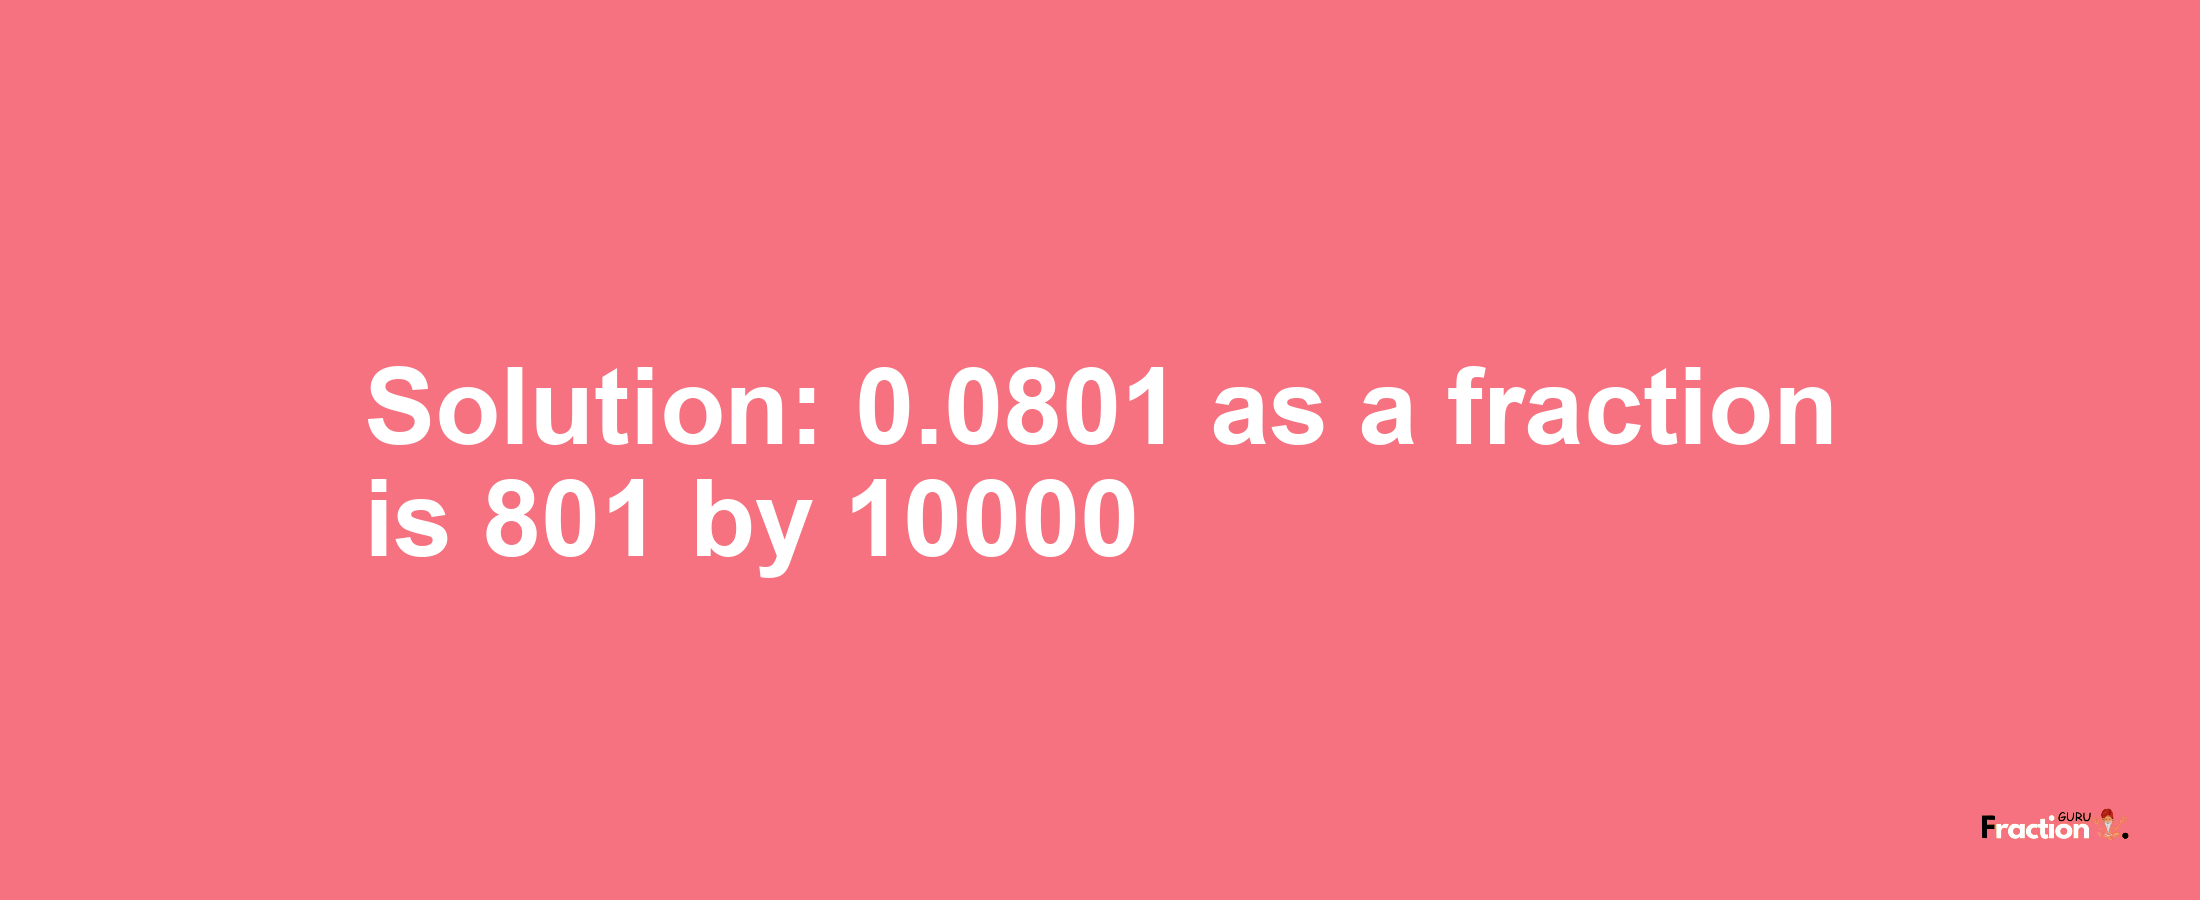 Solution:0.0801 as a fraction is 801/10000